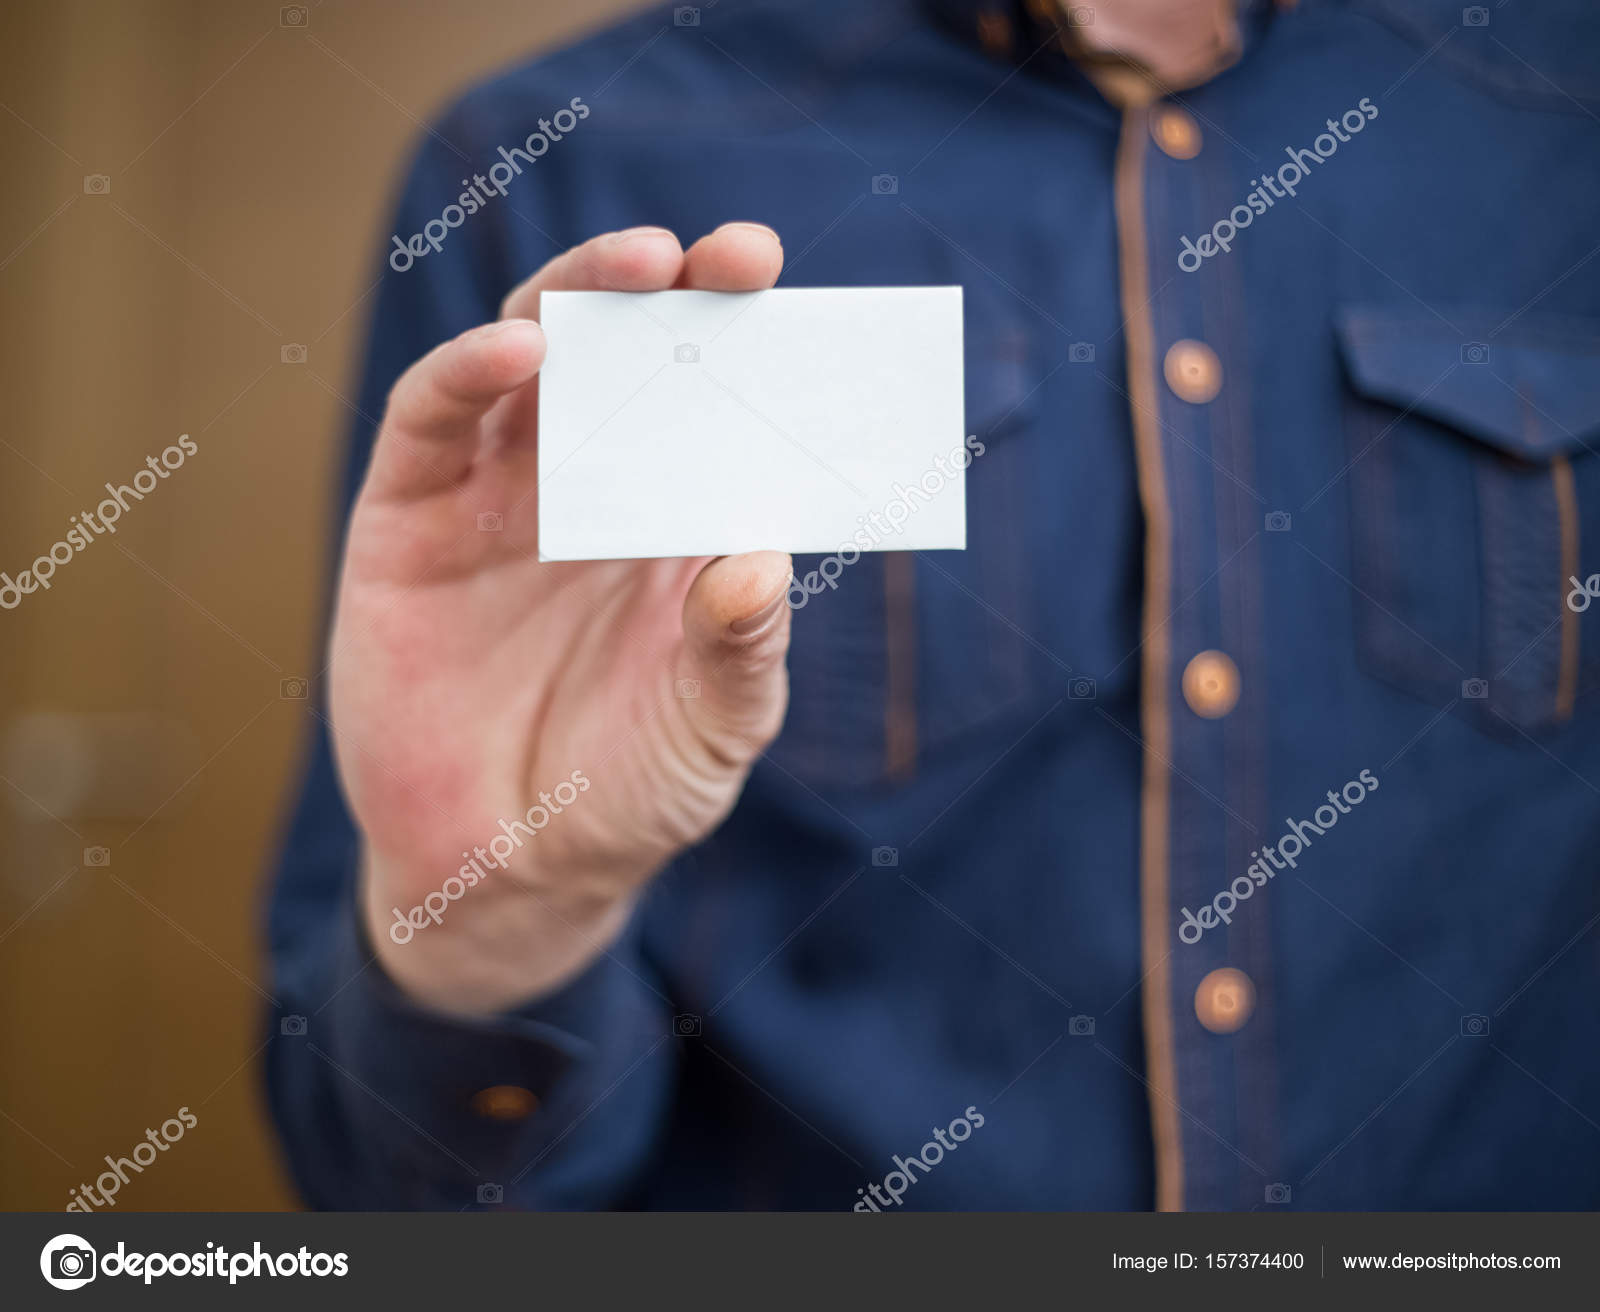 Bank card, business card, businessman holds card in hand, financ ...